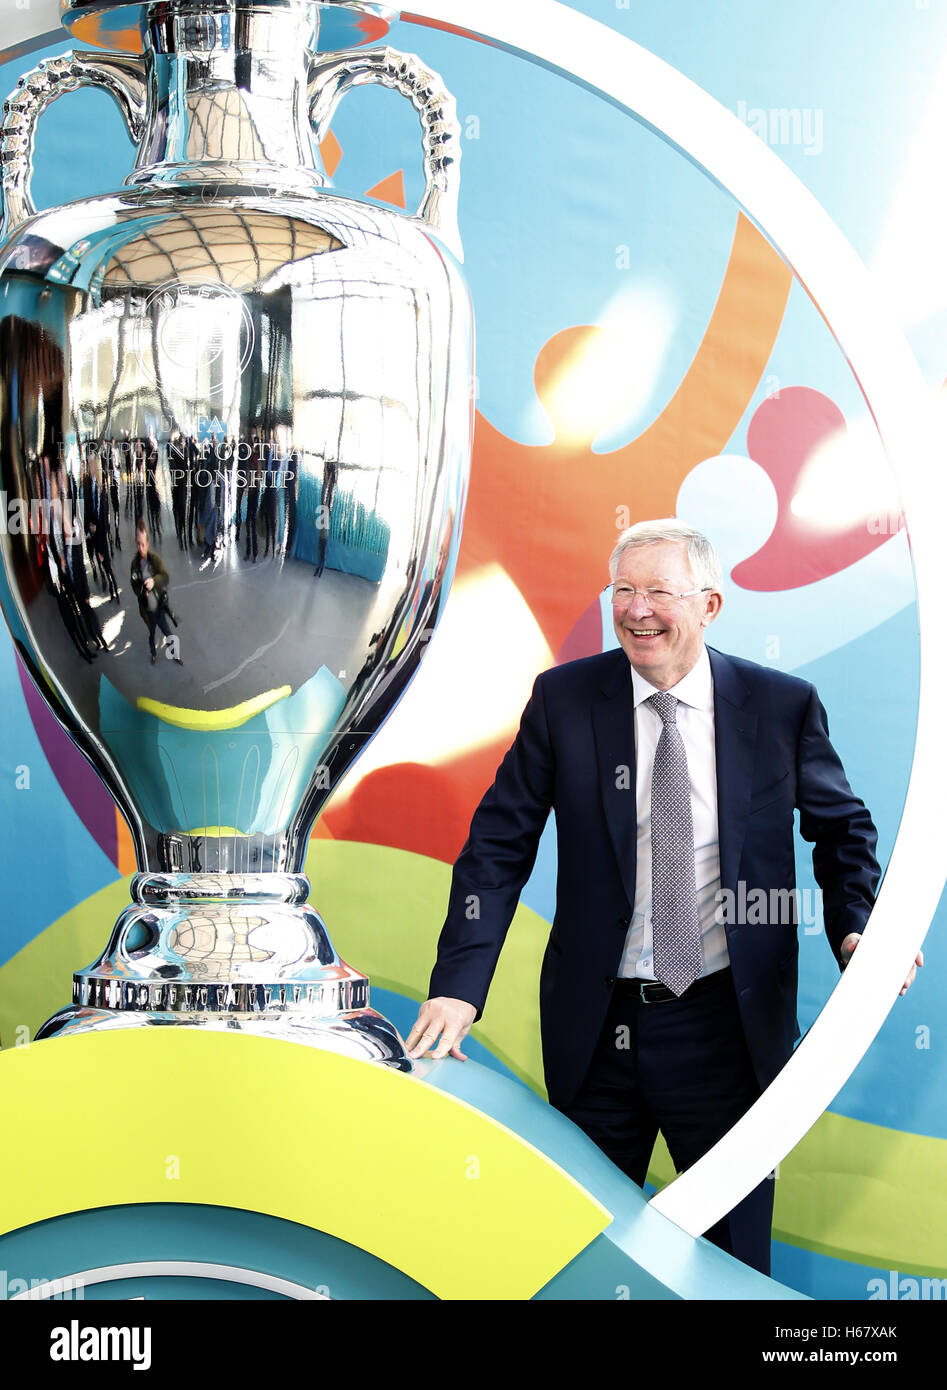 Sir Alex Ferguson during an event for the launch of the UEFA Euro 2020 Logo at the Glasgow Science Centre. Stock Photo